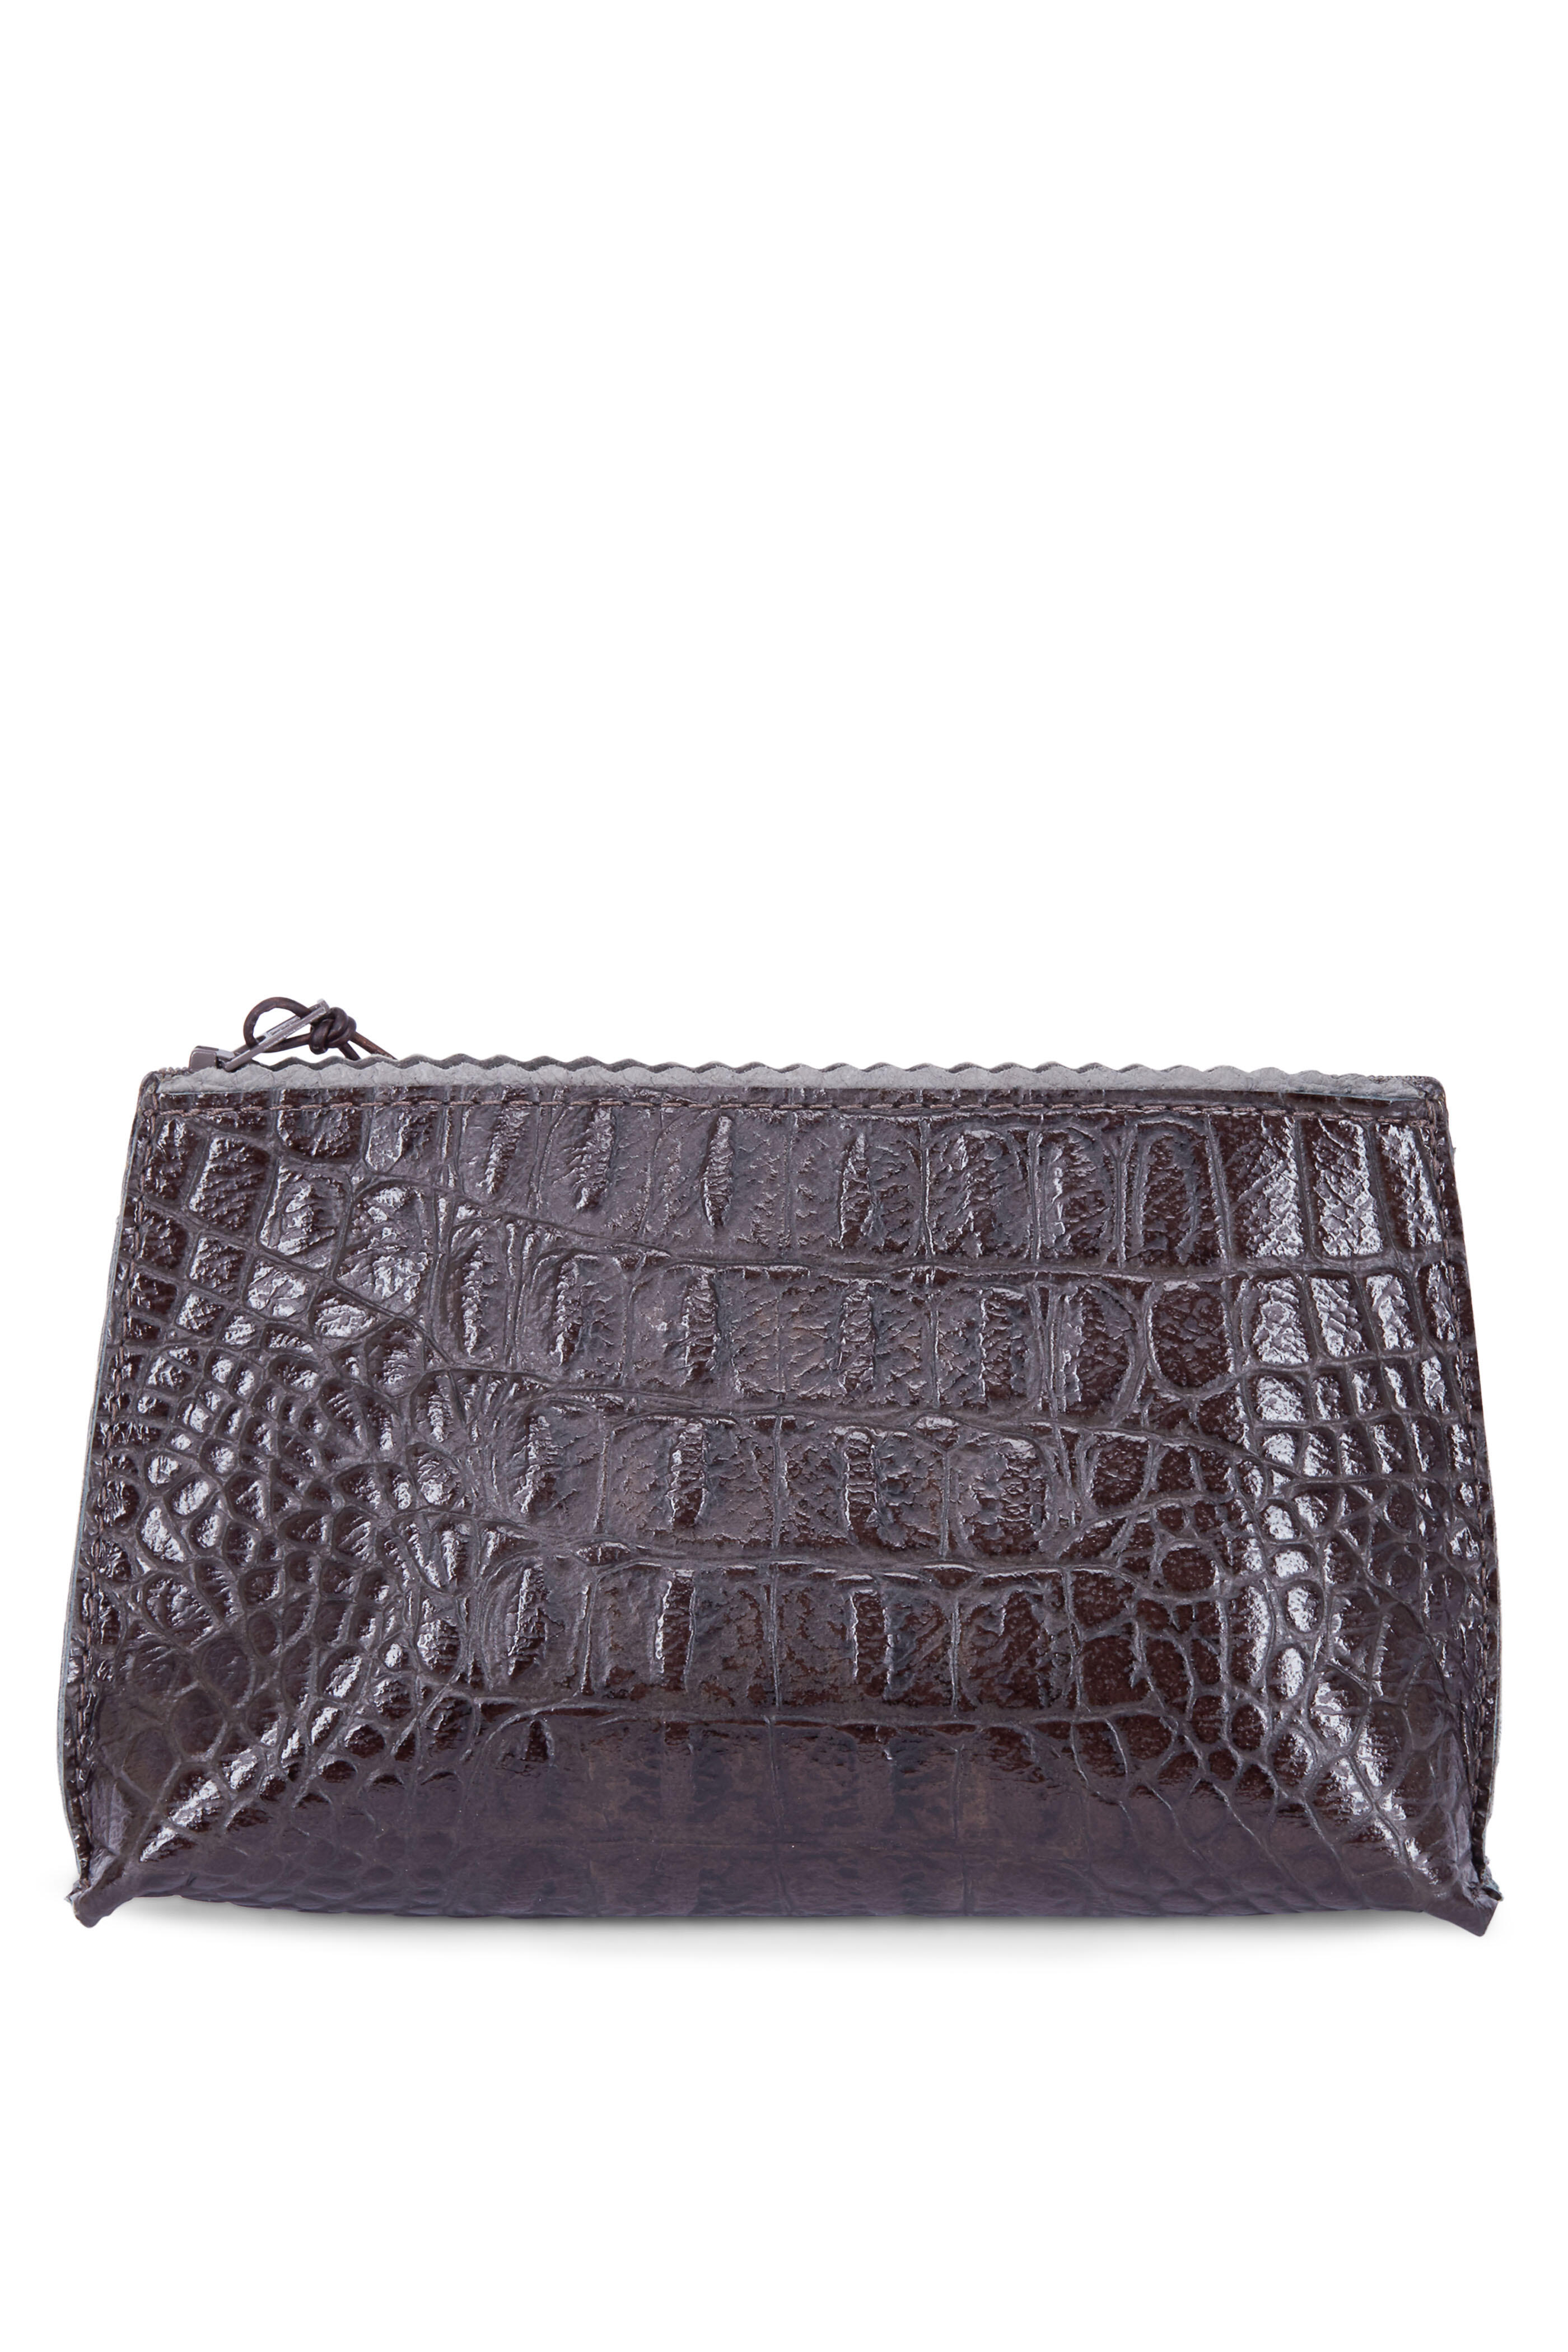 B May Bags - Granite Embossed Croc Lipstick Pouch